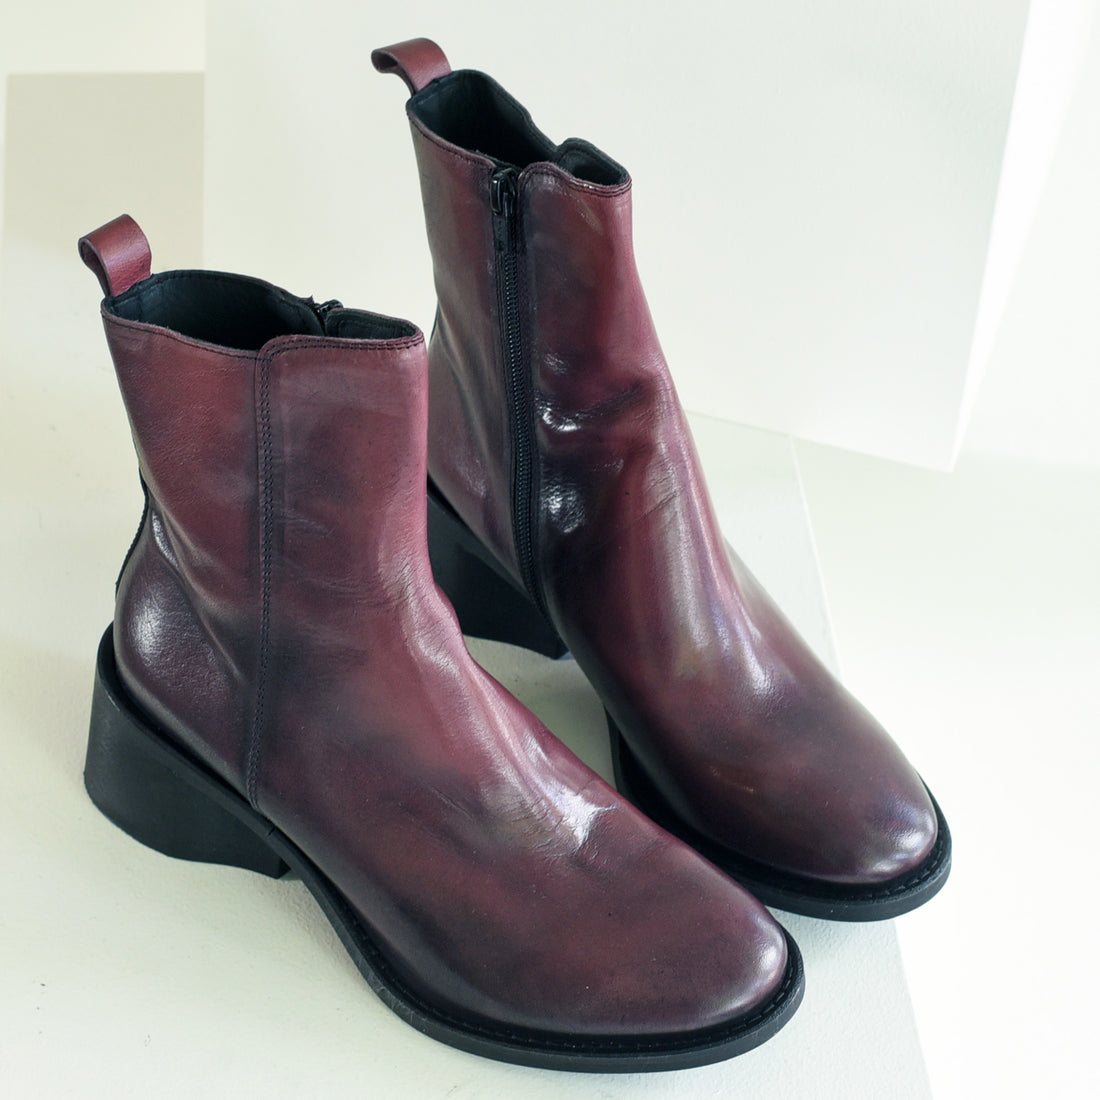 A Mano Online | Handcrafted Italian shoes, boots, sandals for women ...